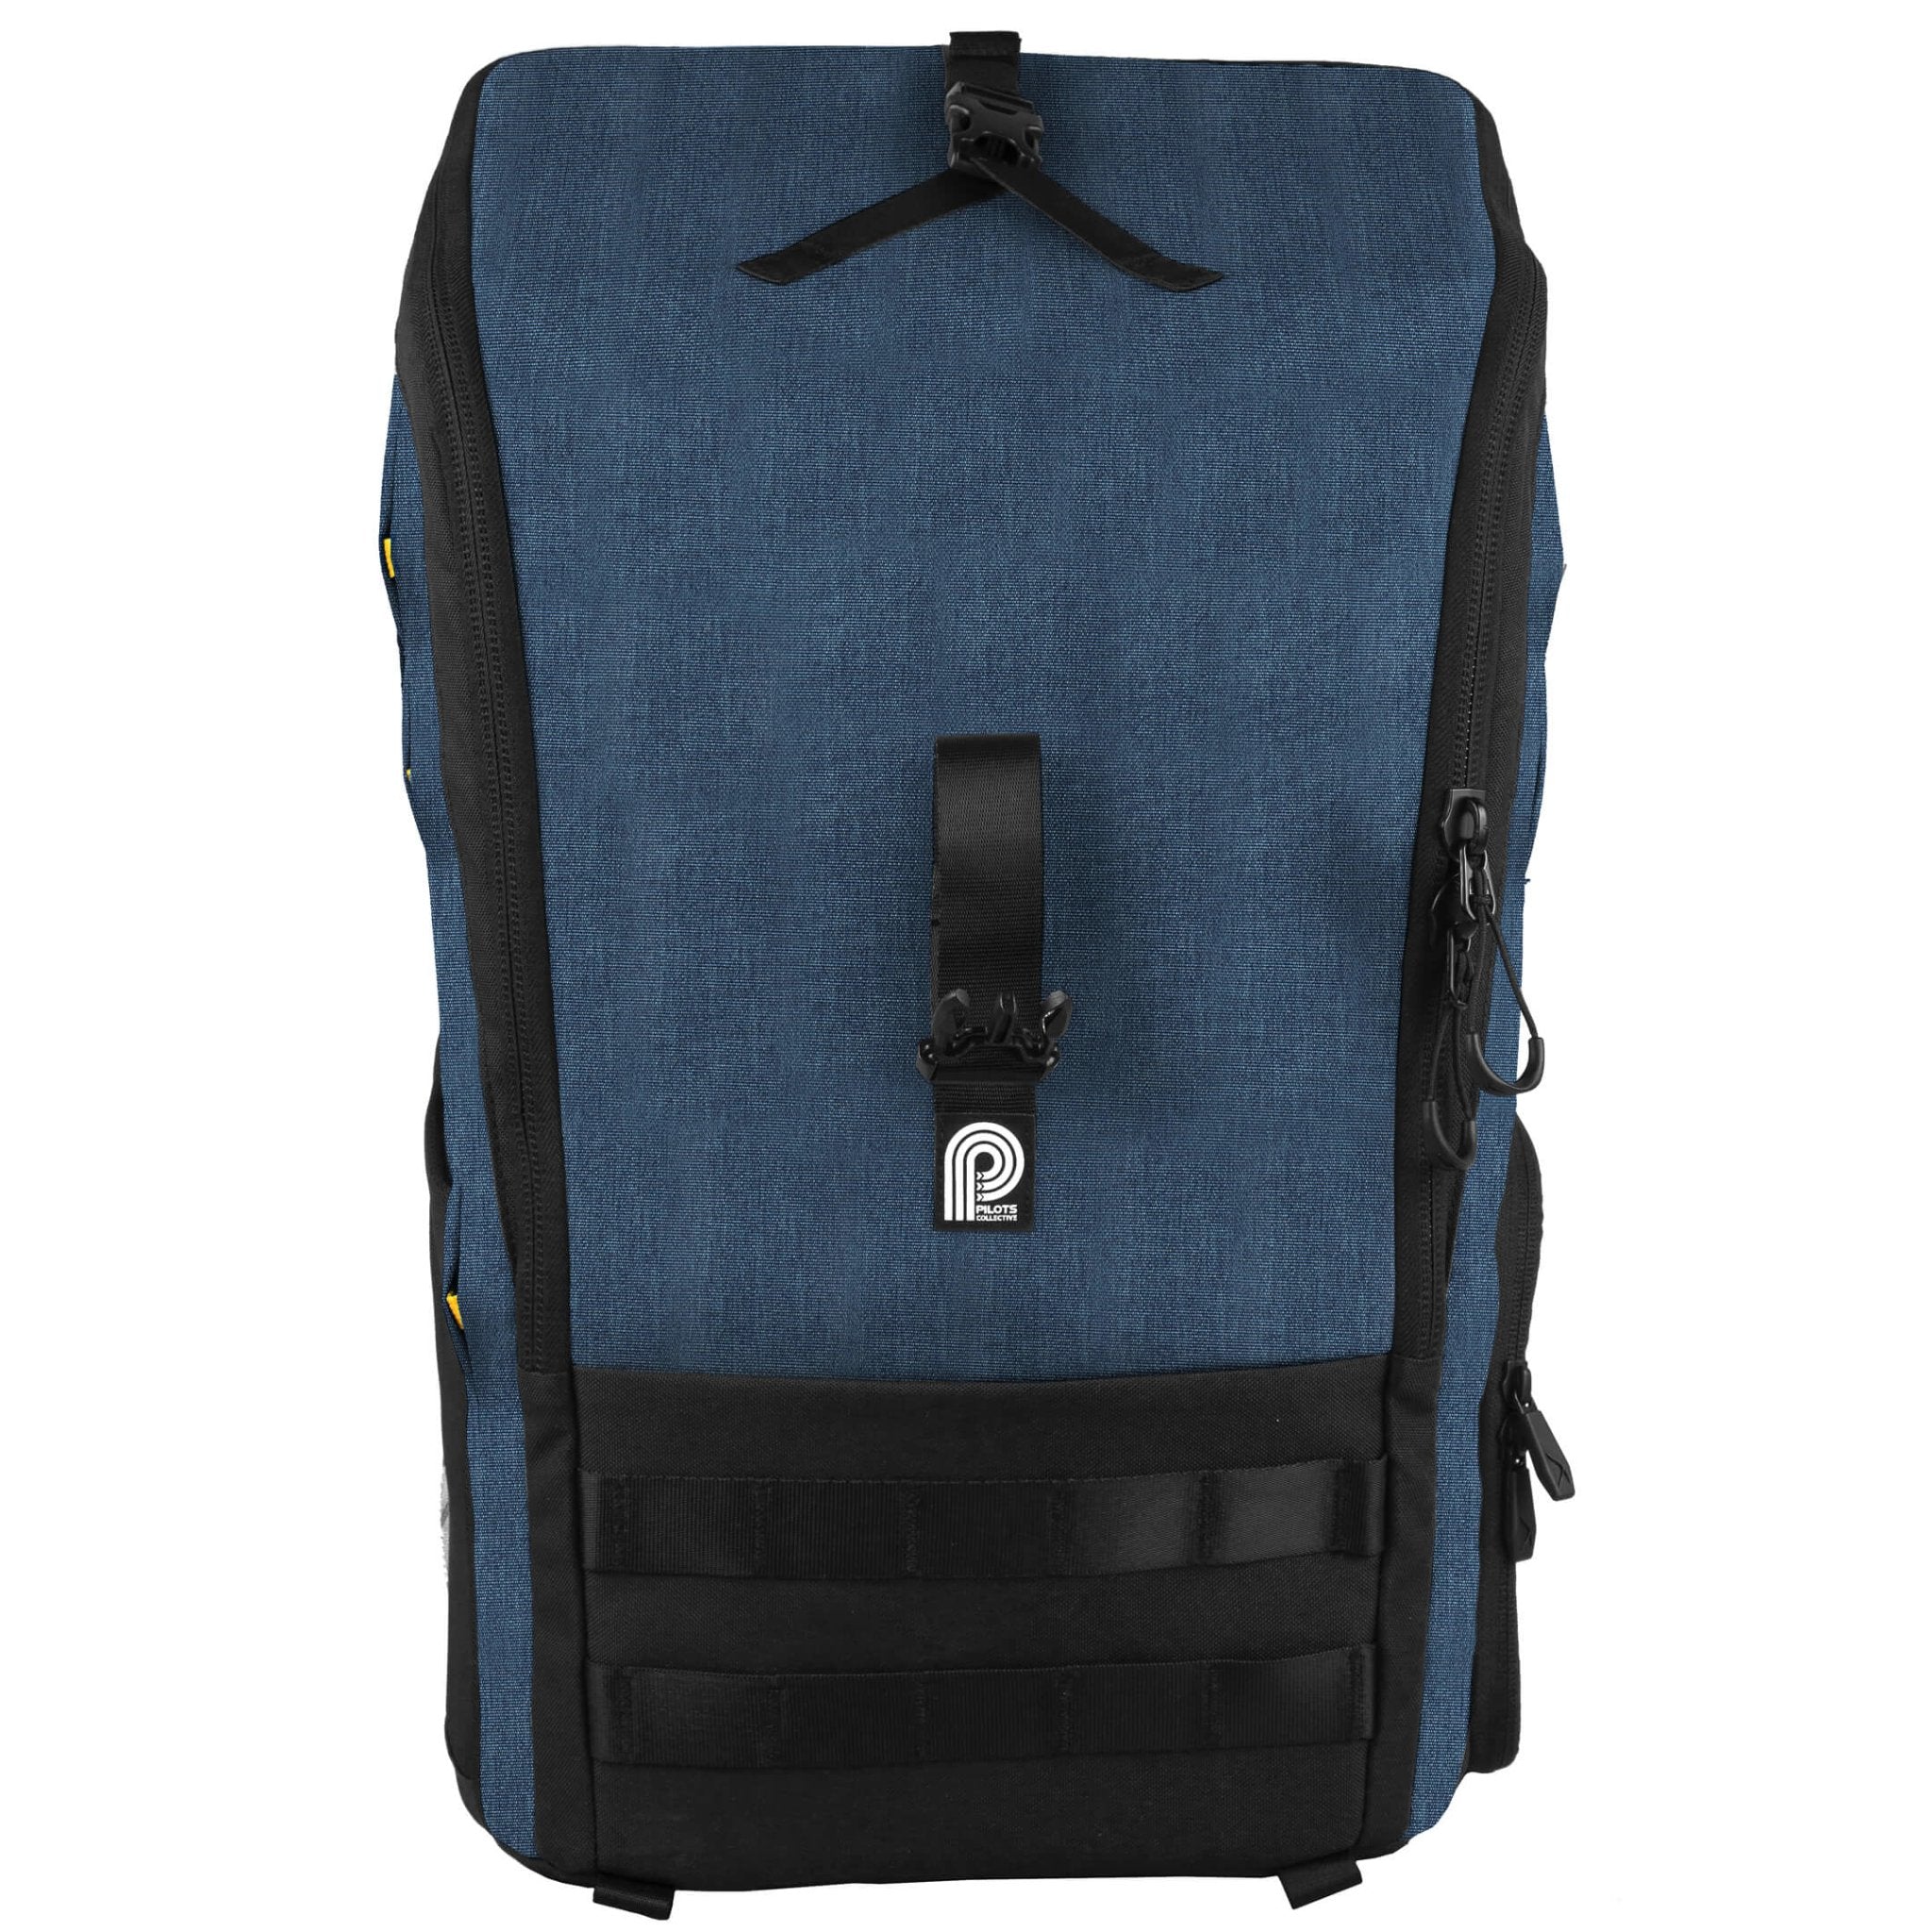 Torvol Urban Carrier Backpack - Your All-Round Freestyle Backpack 13 - Torvol - Drone Authority